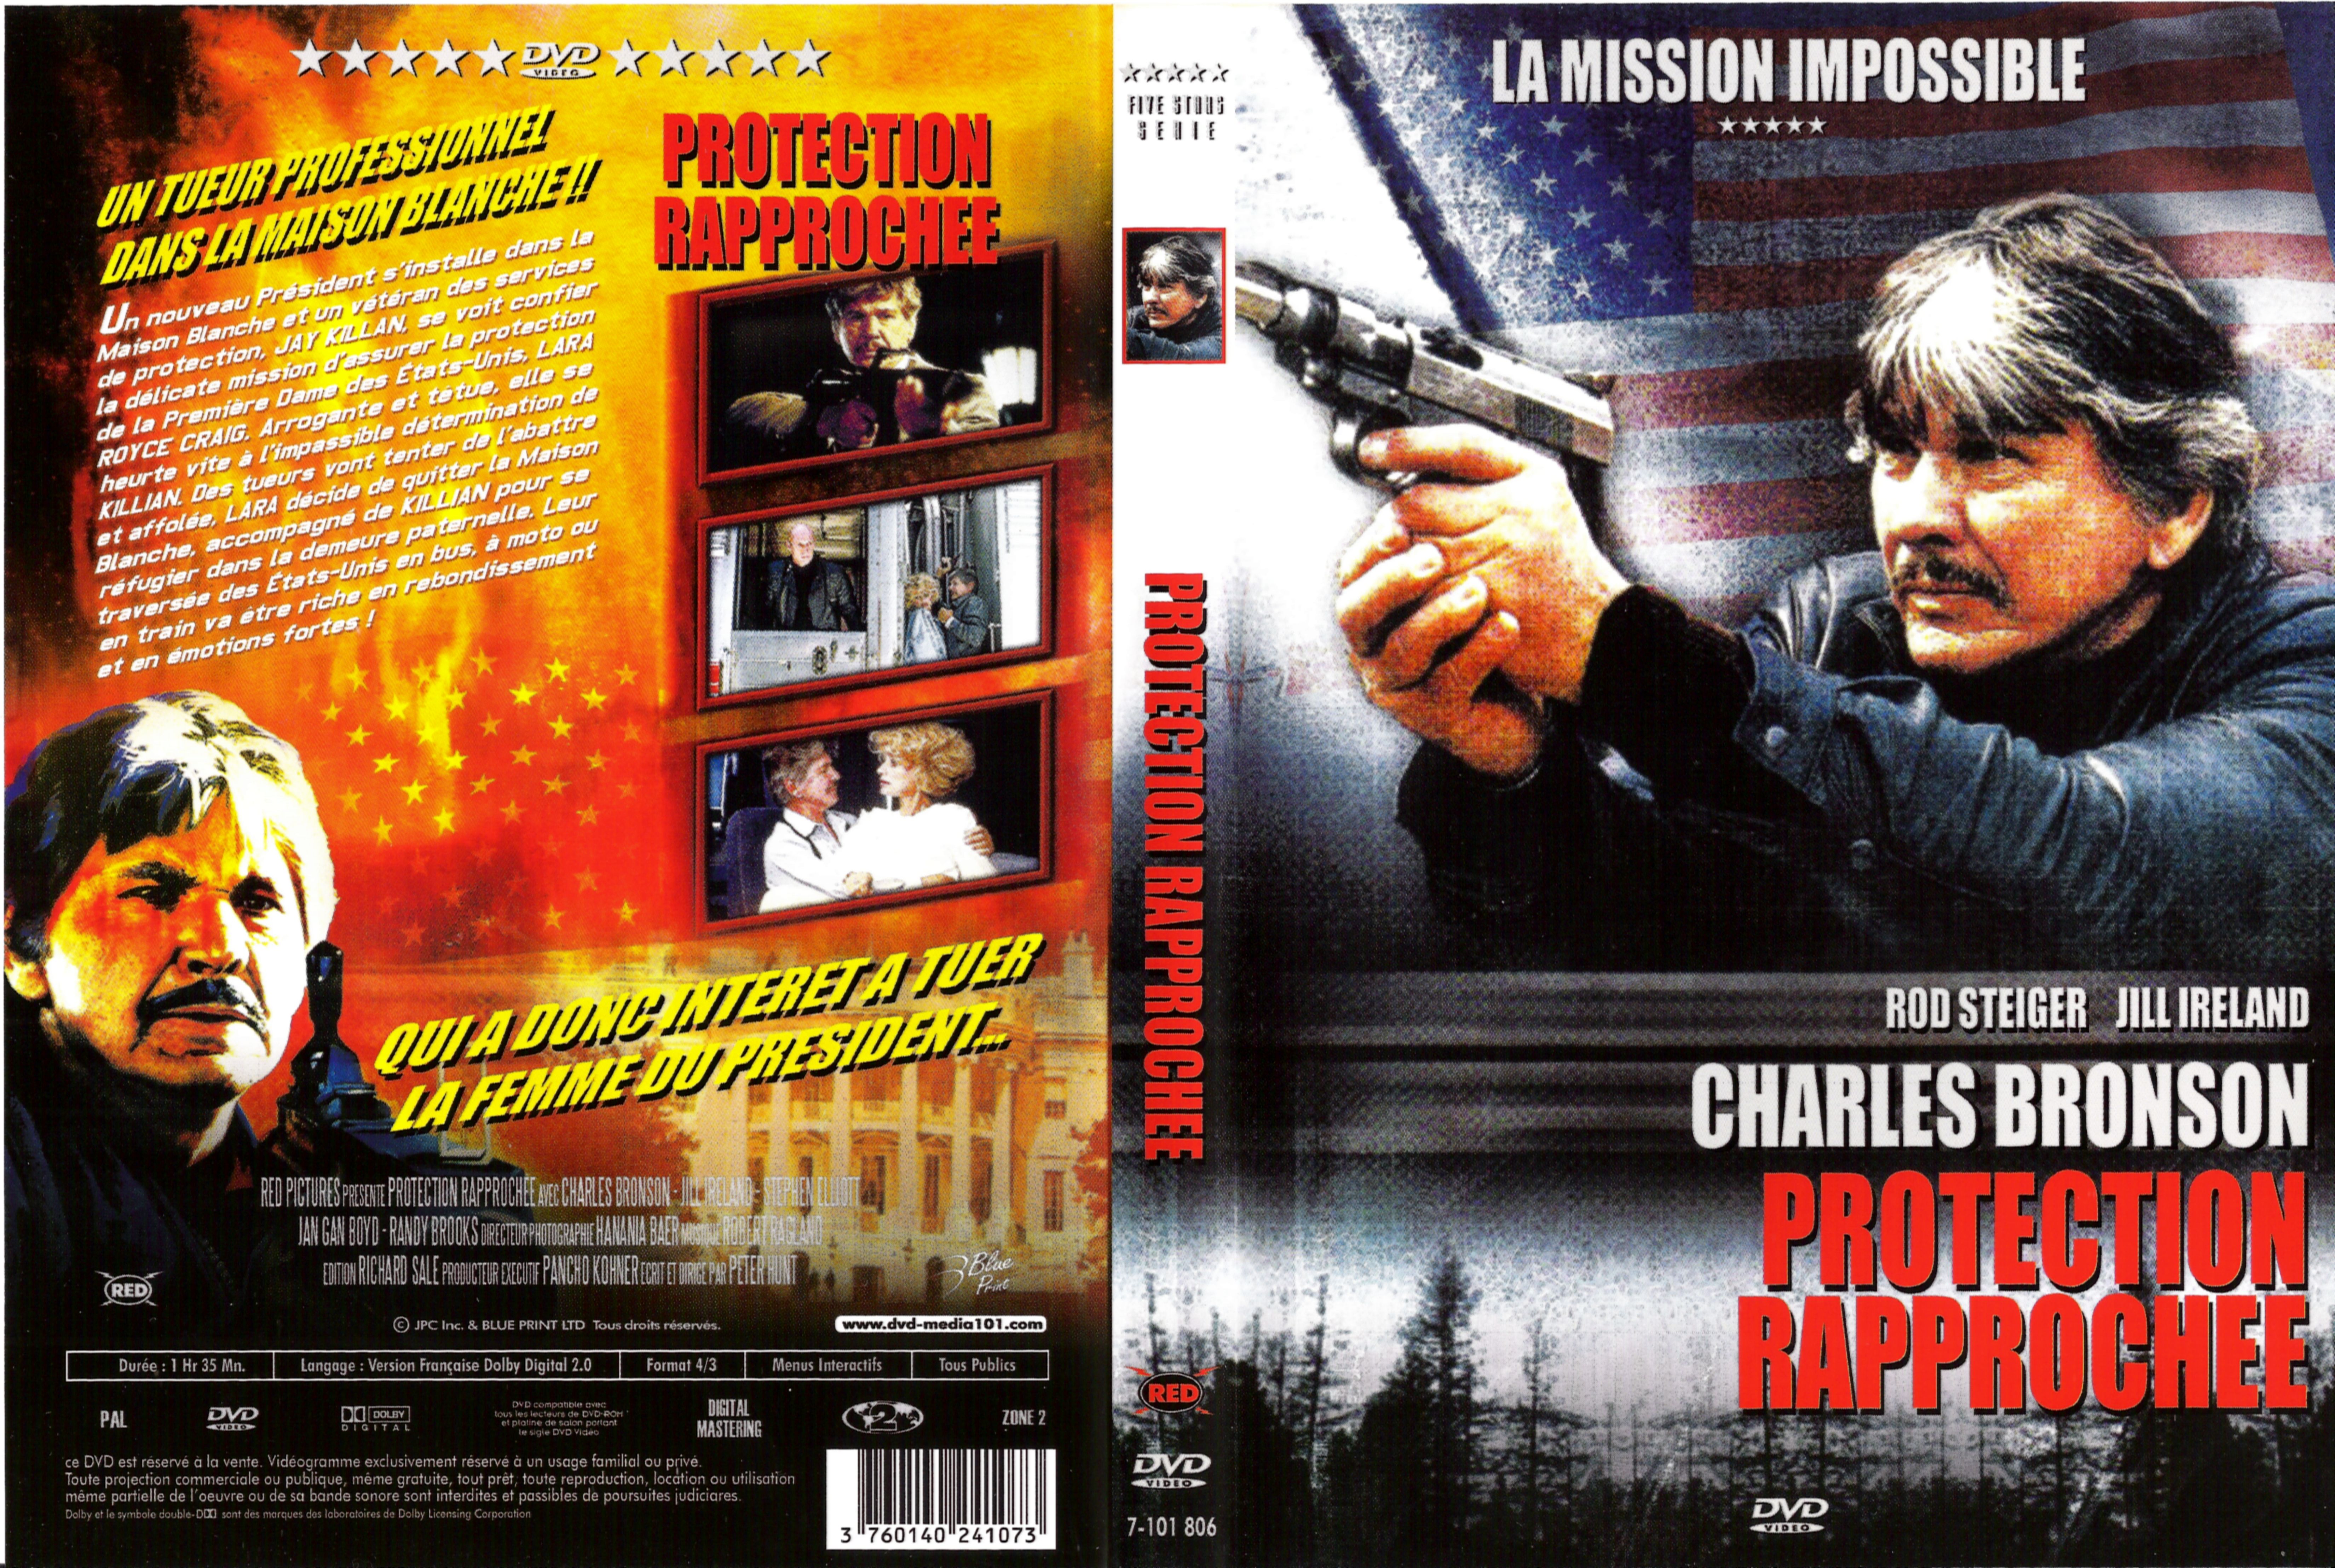 Jaquette DVD Protection rapproche (Charles Bronson)